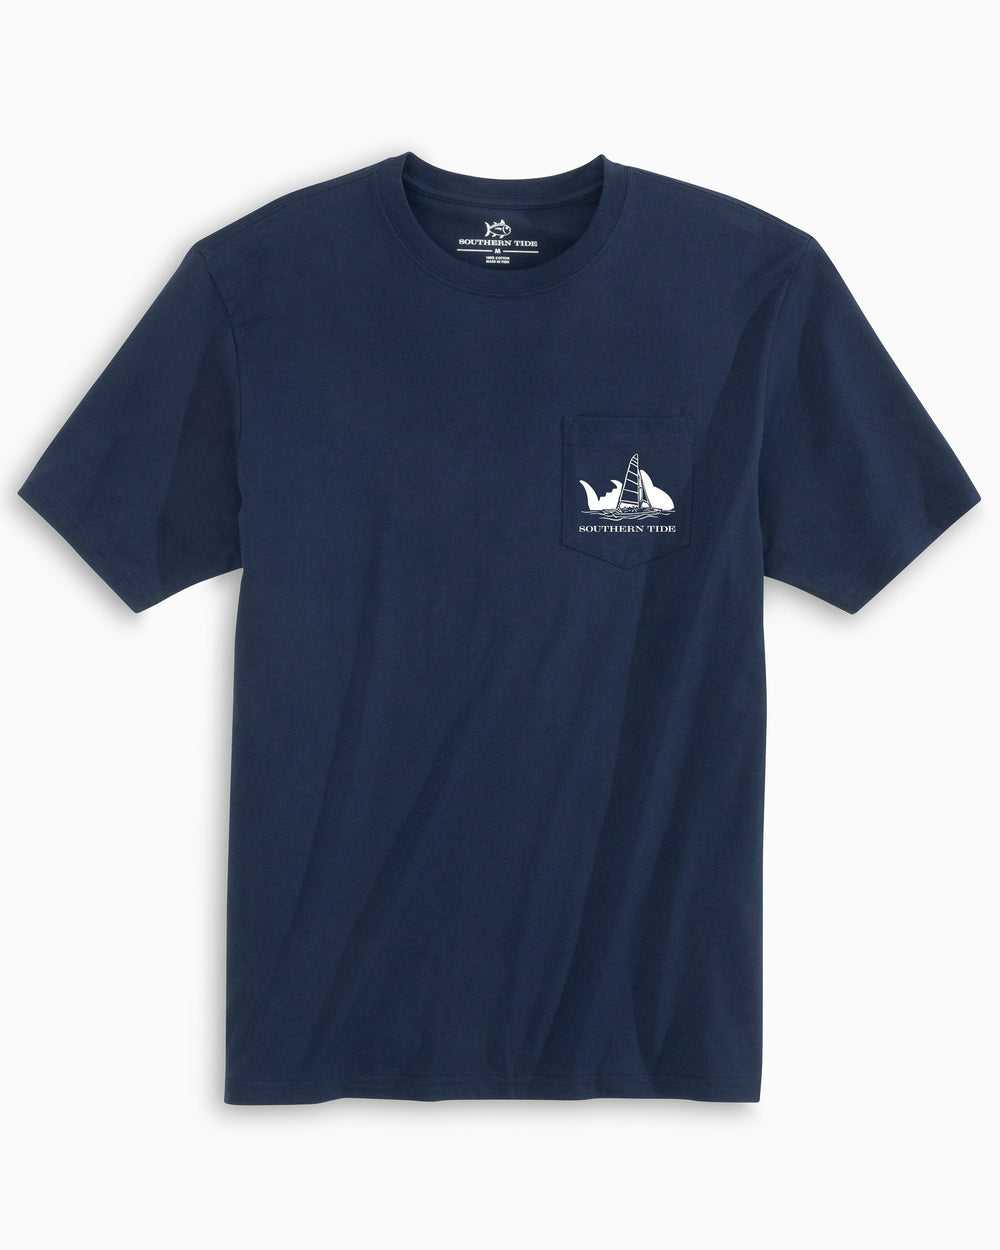 The front view of the Sunset Silhouette T-Shirt by Southern Tide - Navy